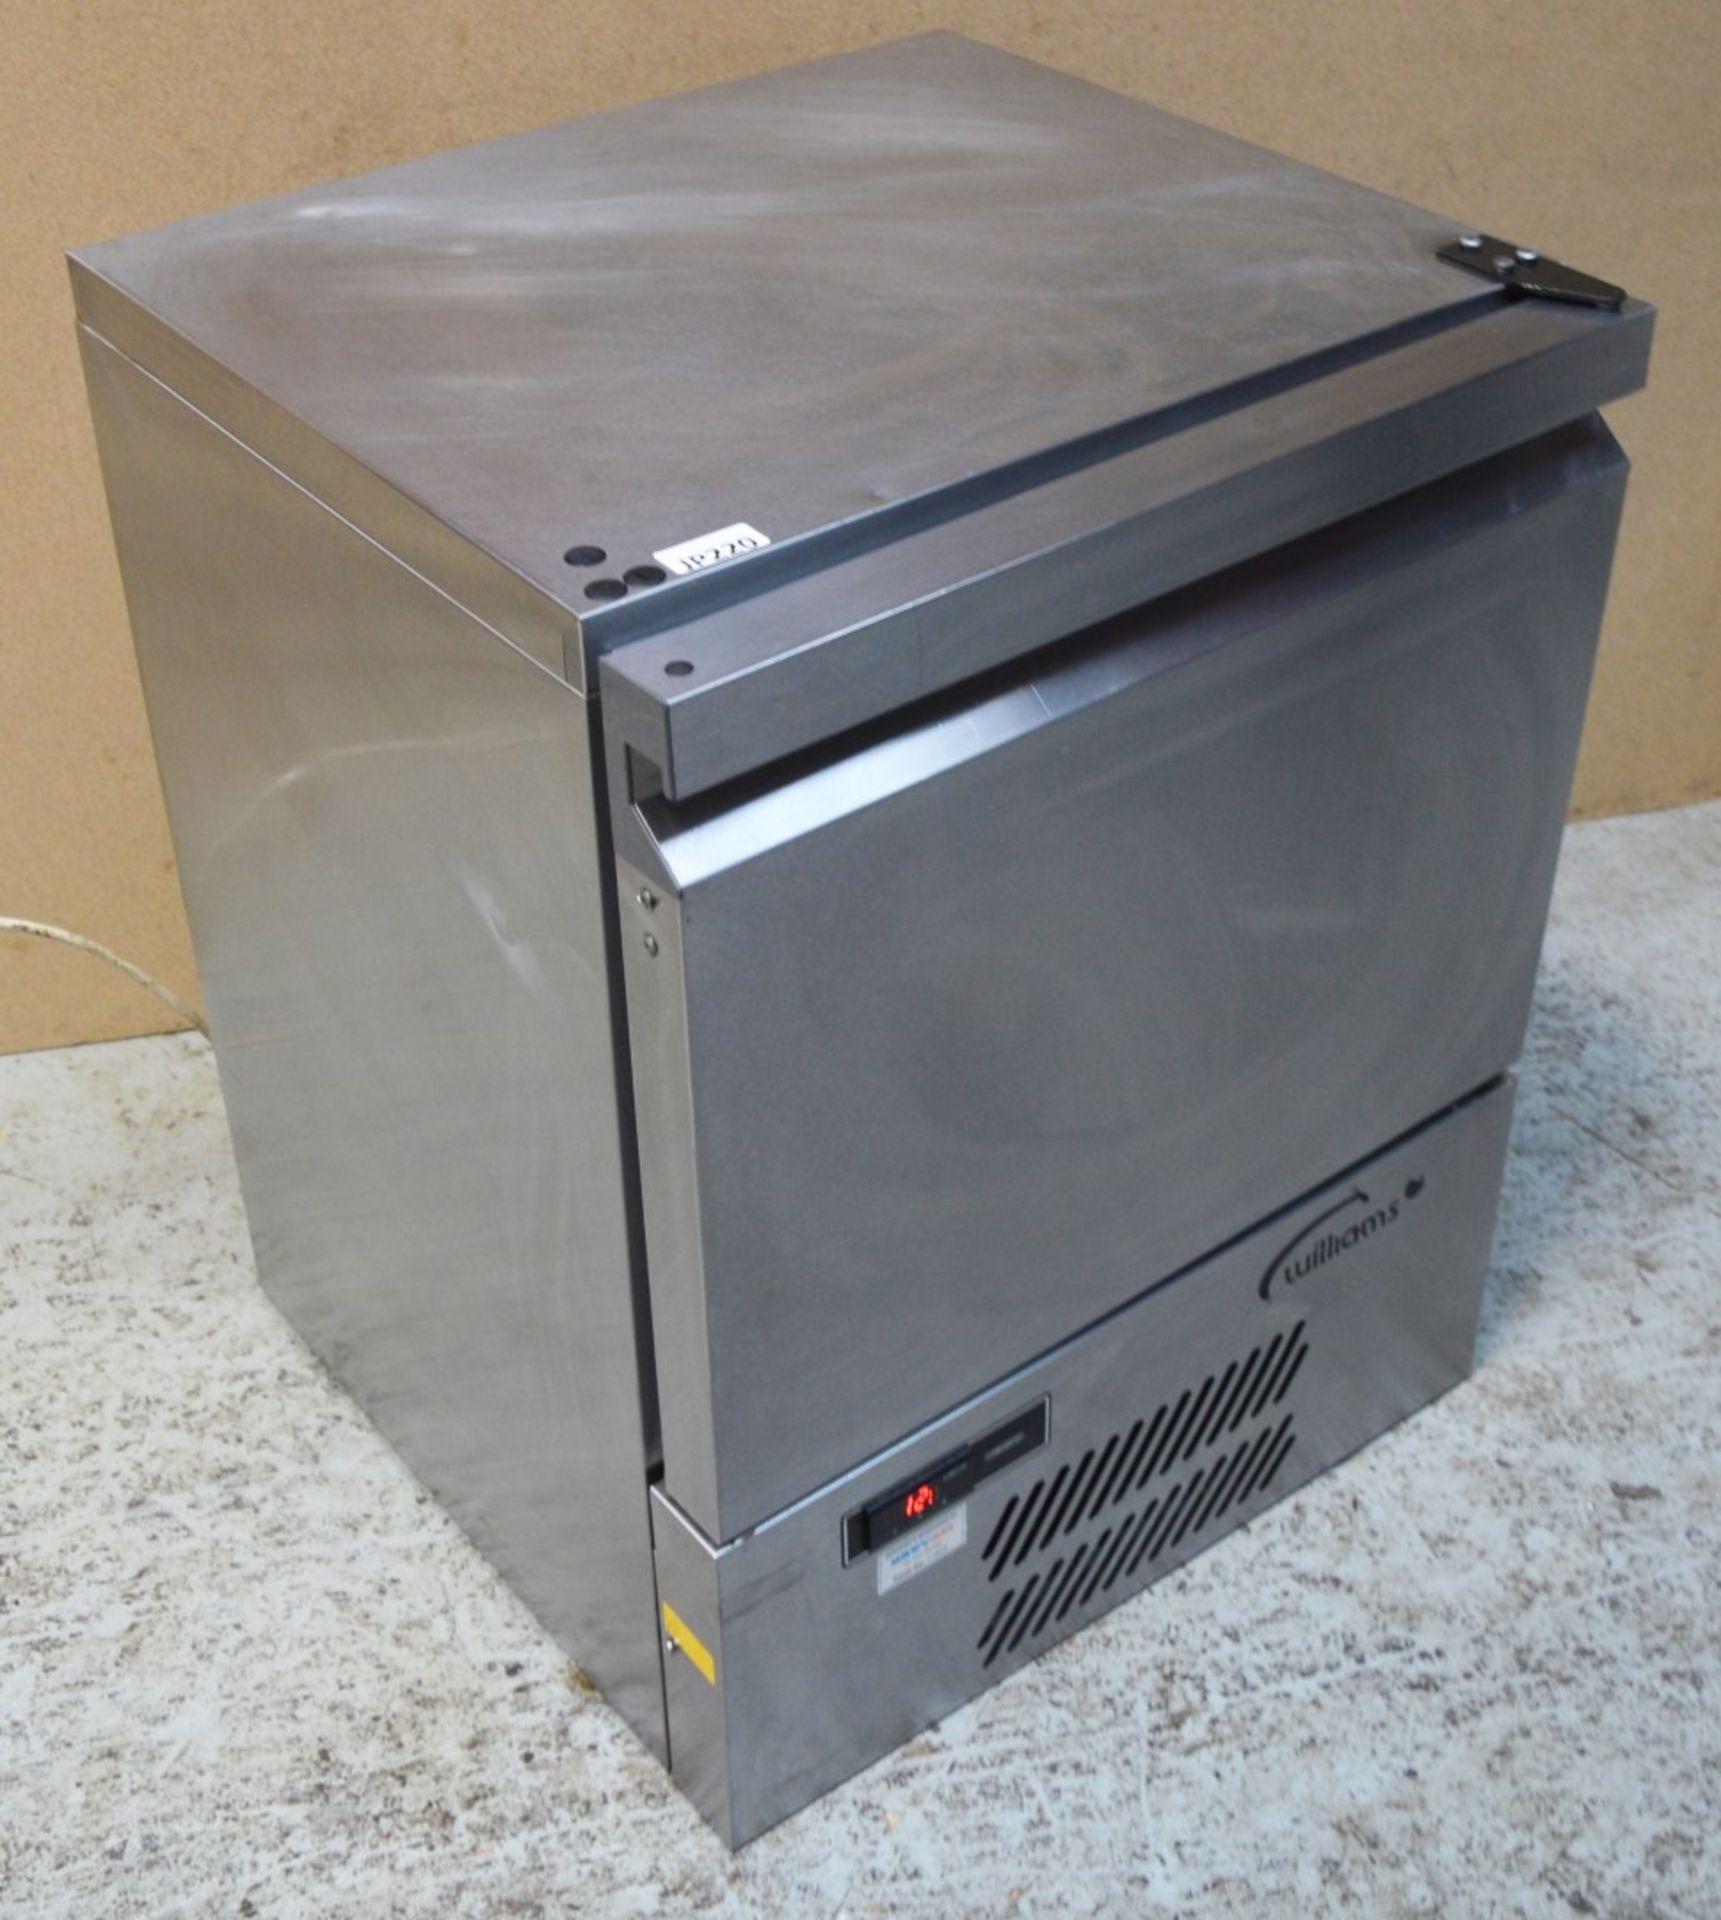 1 x Williams Single Door Under Counter Freezer - Model L5UC - Stainless Steel Finish - Suitable - Image 7 of 8